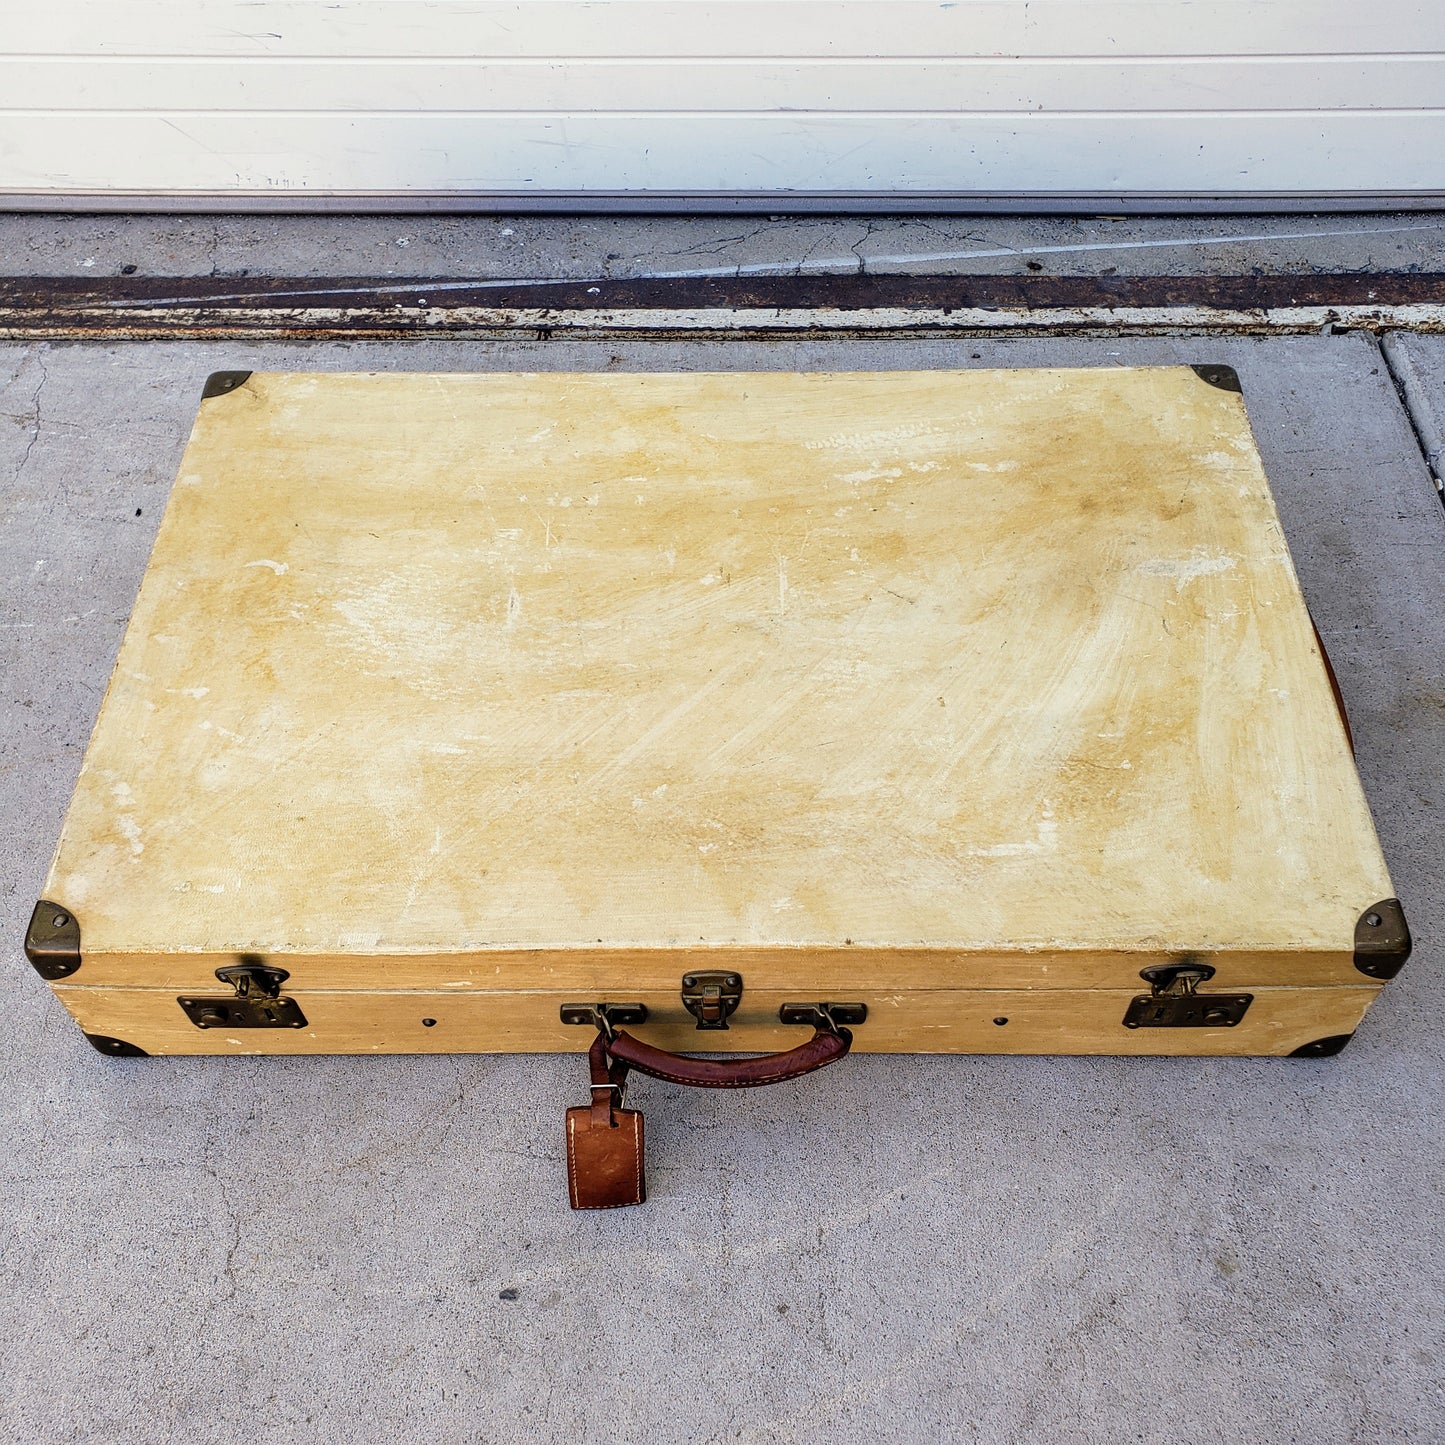 Tan Hard Sided Suitcase